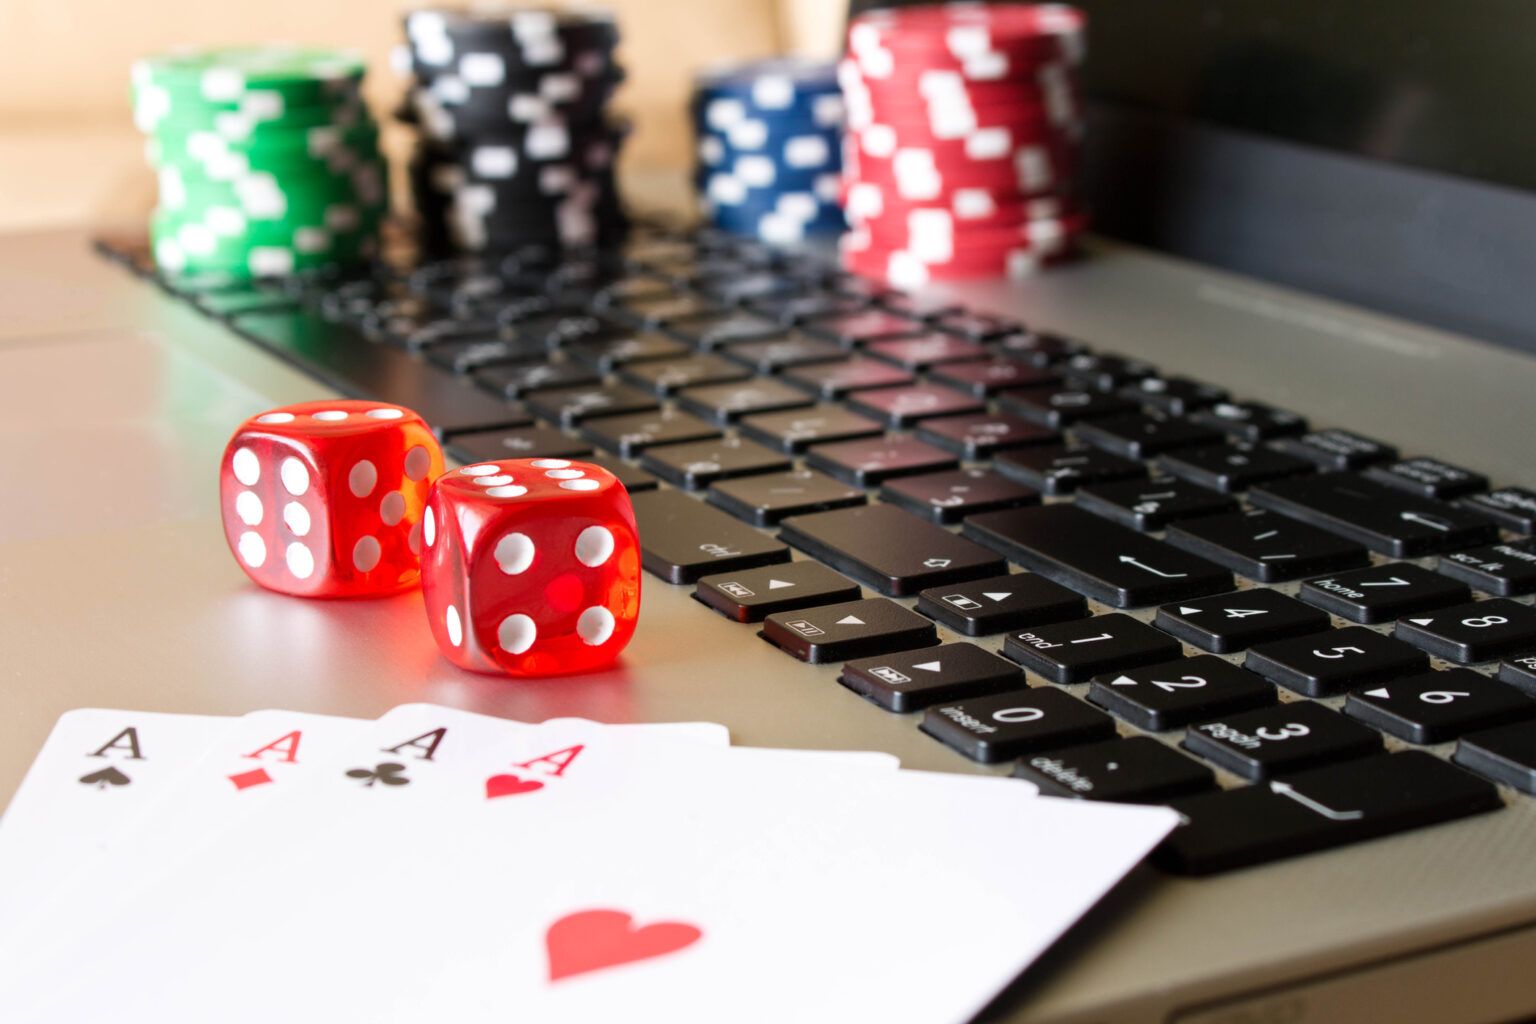 Online casinos are the wave of the future. Find out how which online casino is best suited to your gambling wants with our guide.